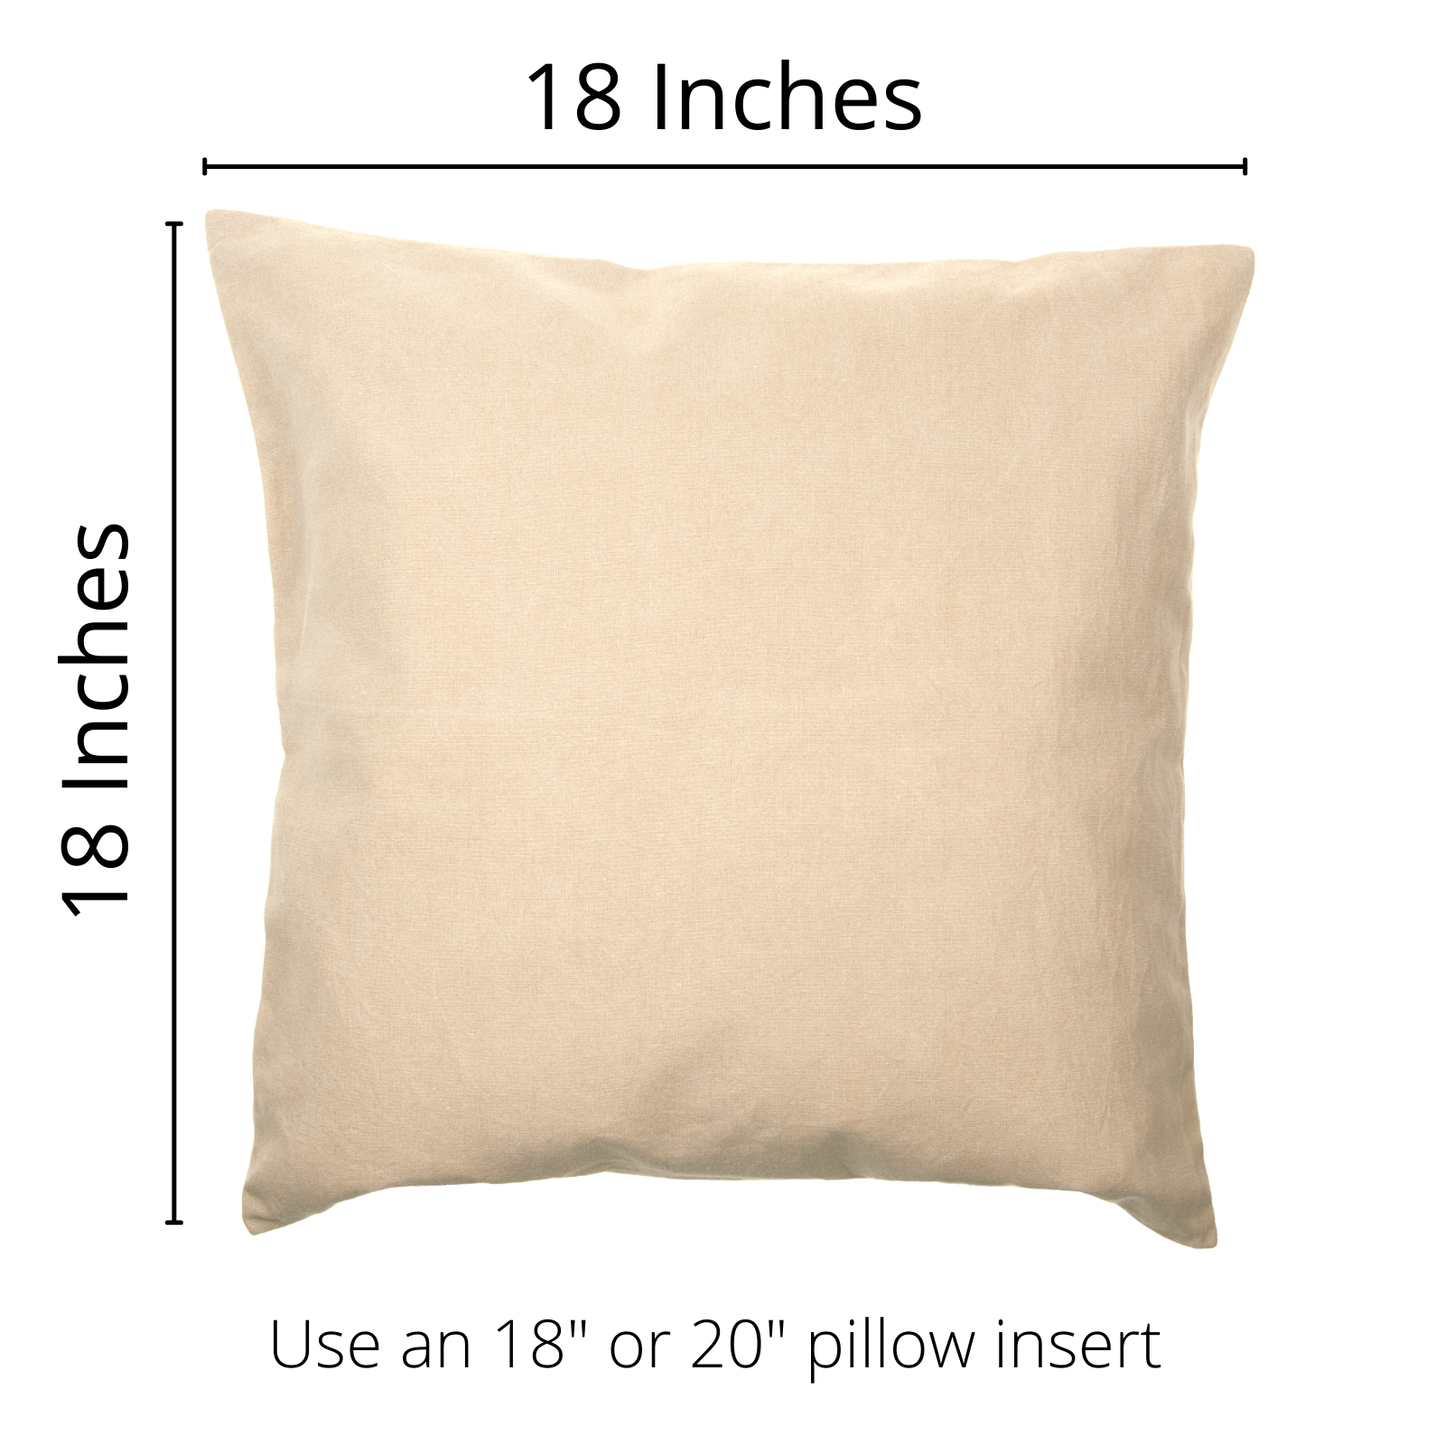 Zest for Life Pillow Cover